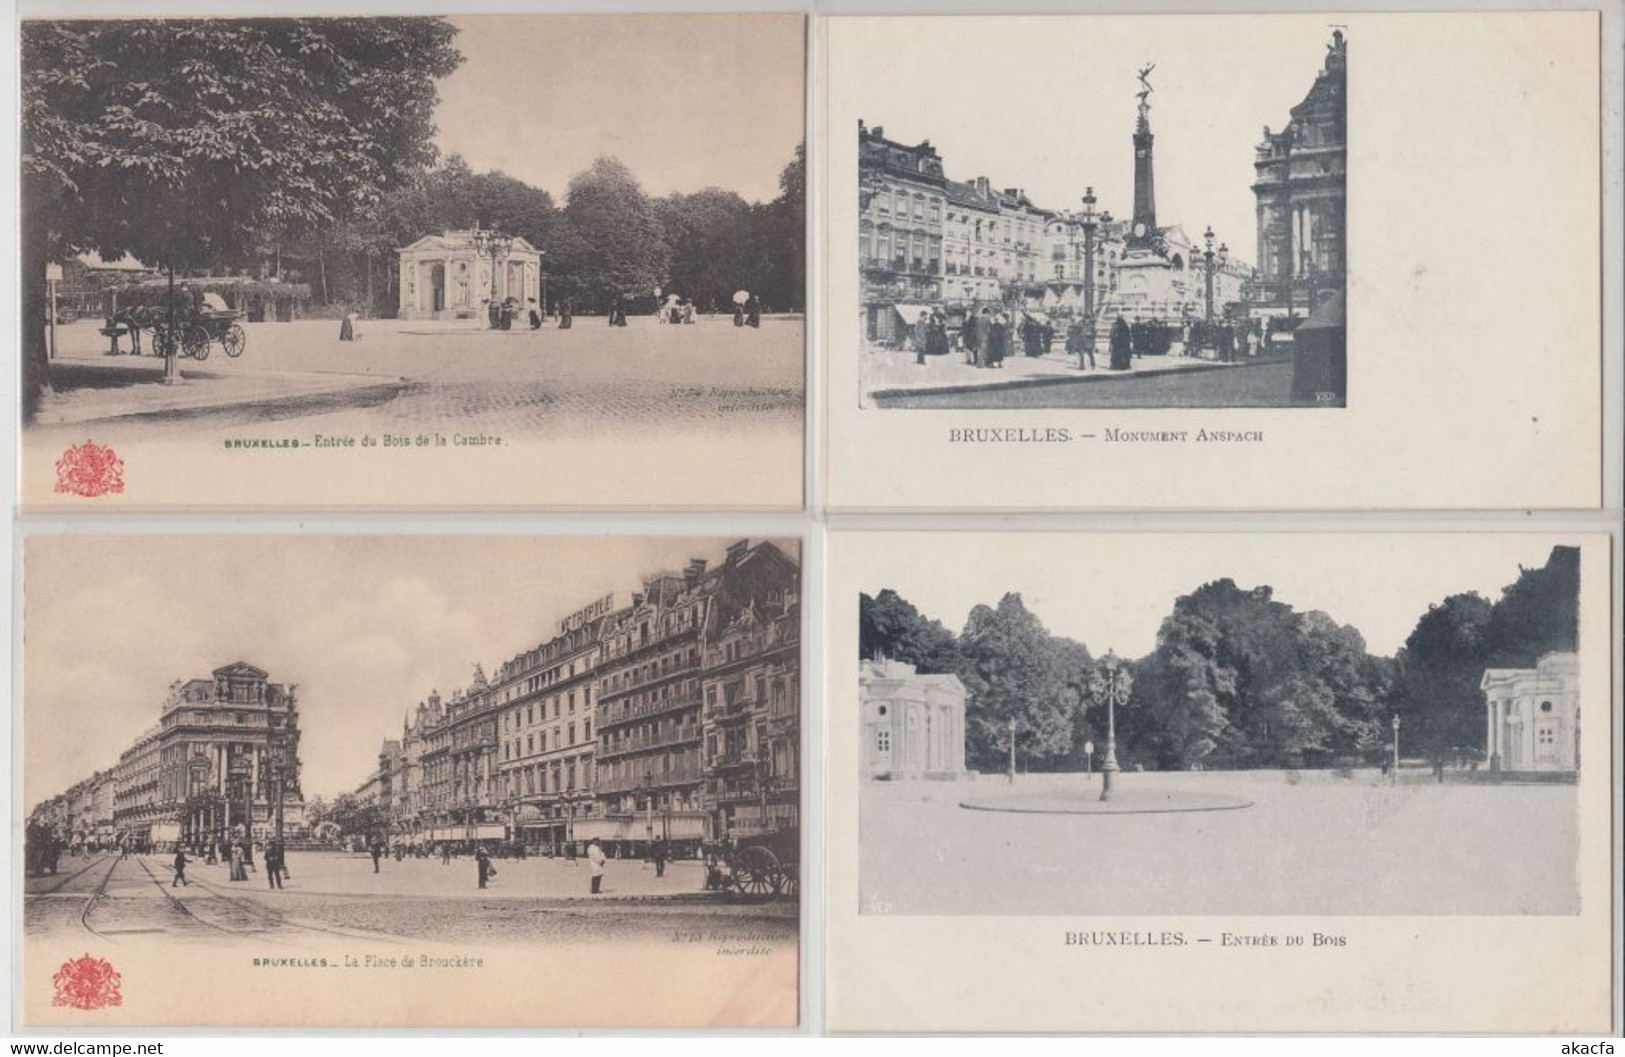 BRUSSELS BRUXELLES BELGIUM 222 Vintage Postcards Mostly Pre-1920 (L5915) - Collections & Lots